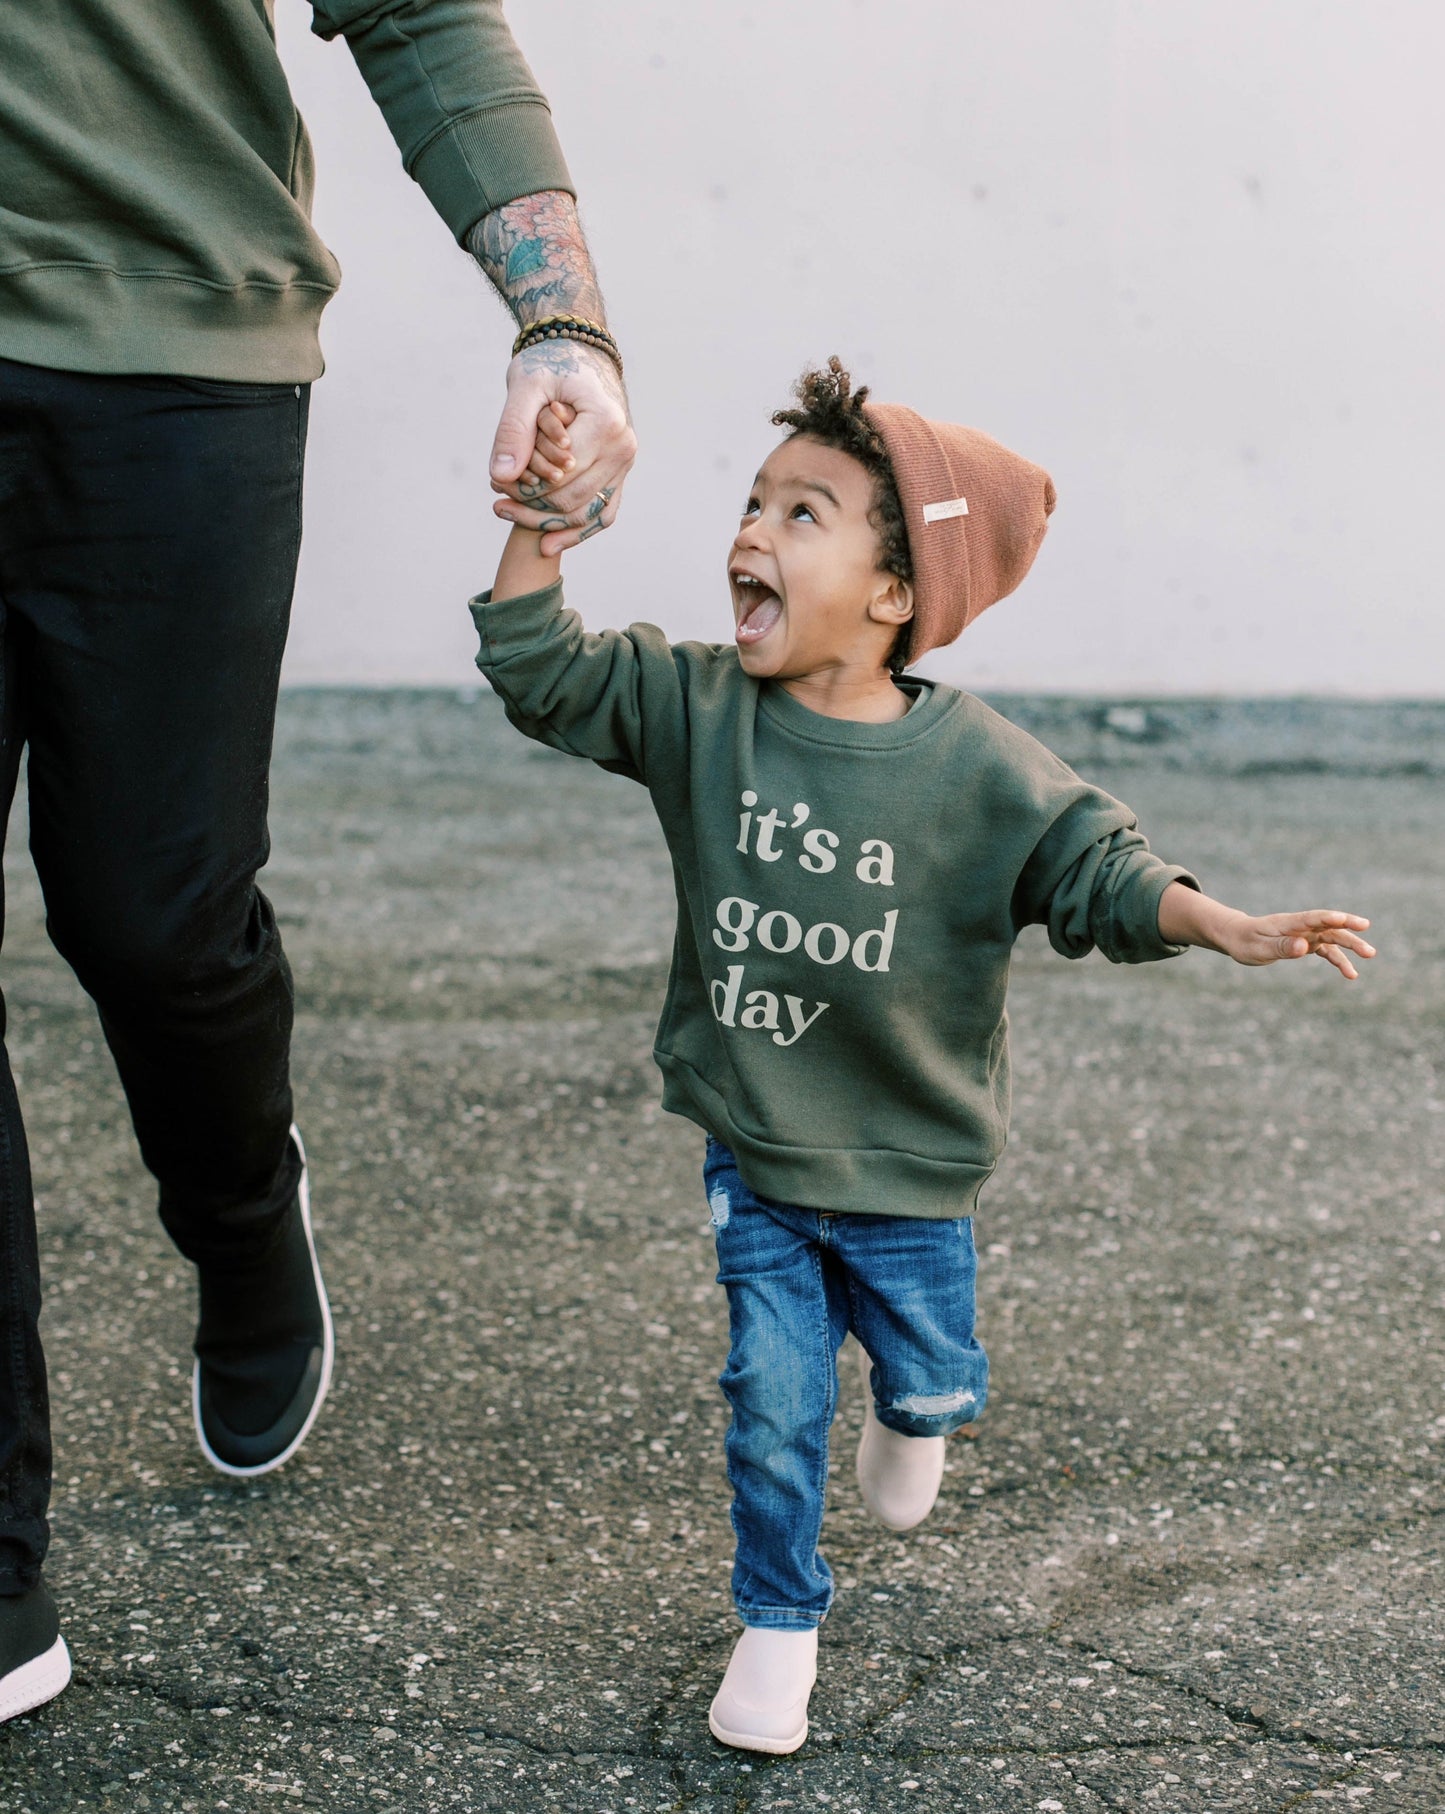 Kids Crew Neck Pullover - Good Day - Olive Shirts & Tops heyfolks 